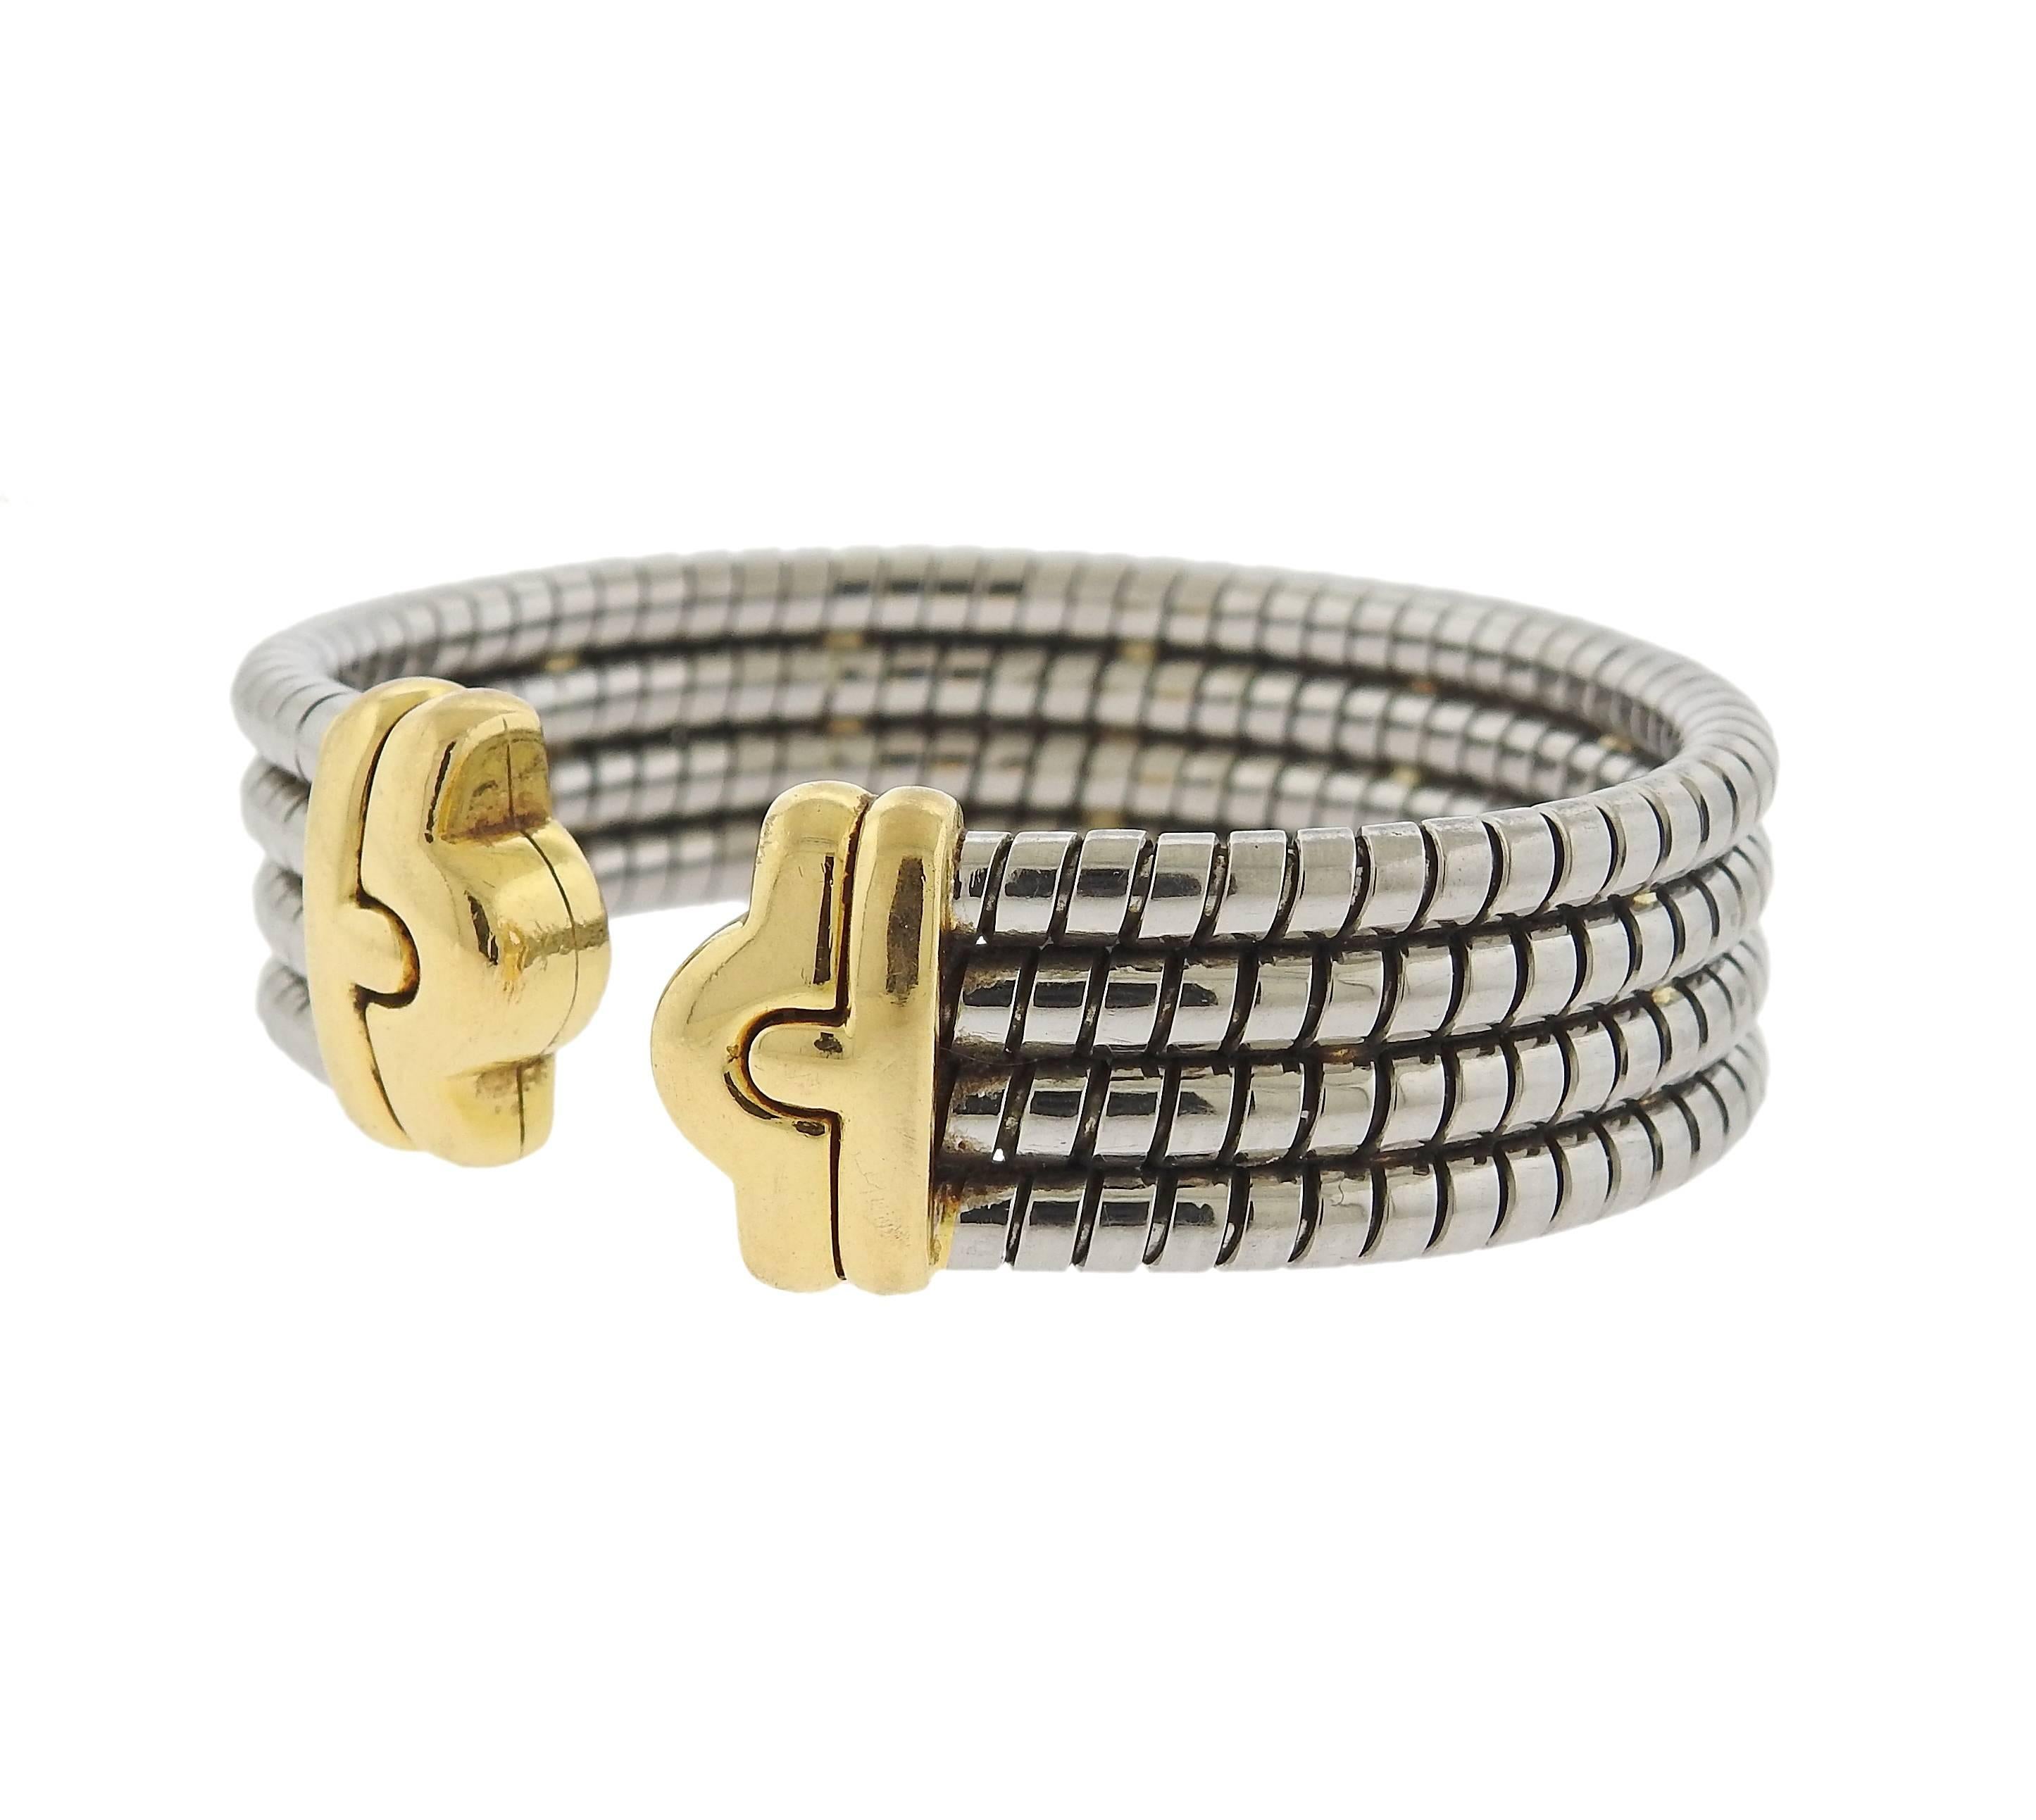 An 18k yellow gold and steel cuff bracelet, crafted by Bulgari for iconic Parentesi collection. Bracelet will comfortably fit approximately 7" - 7 1/2" wrist and is 17mm wide. Marked: Bvlgari, 750, Italian mark, M. Weight - 51.7 grams. 